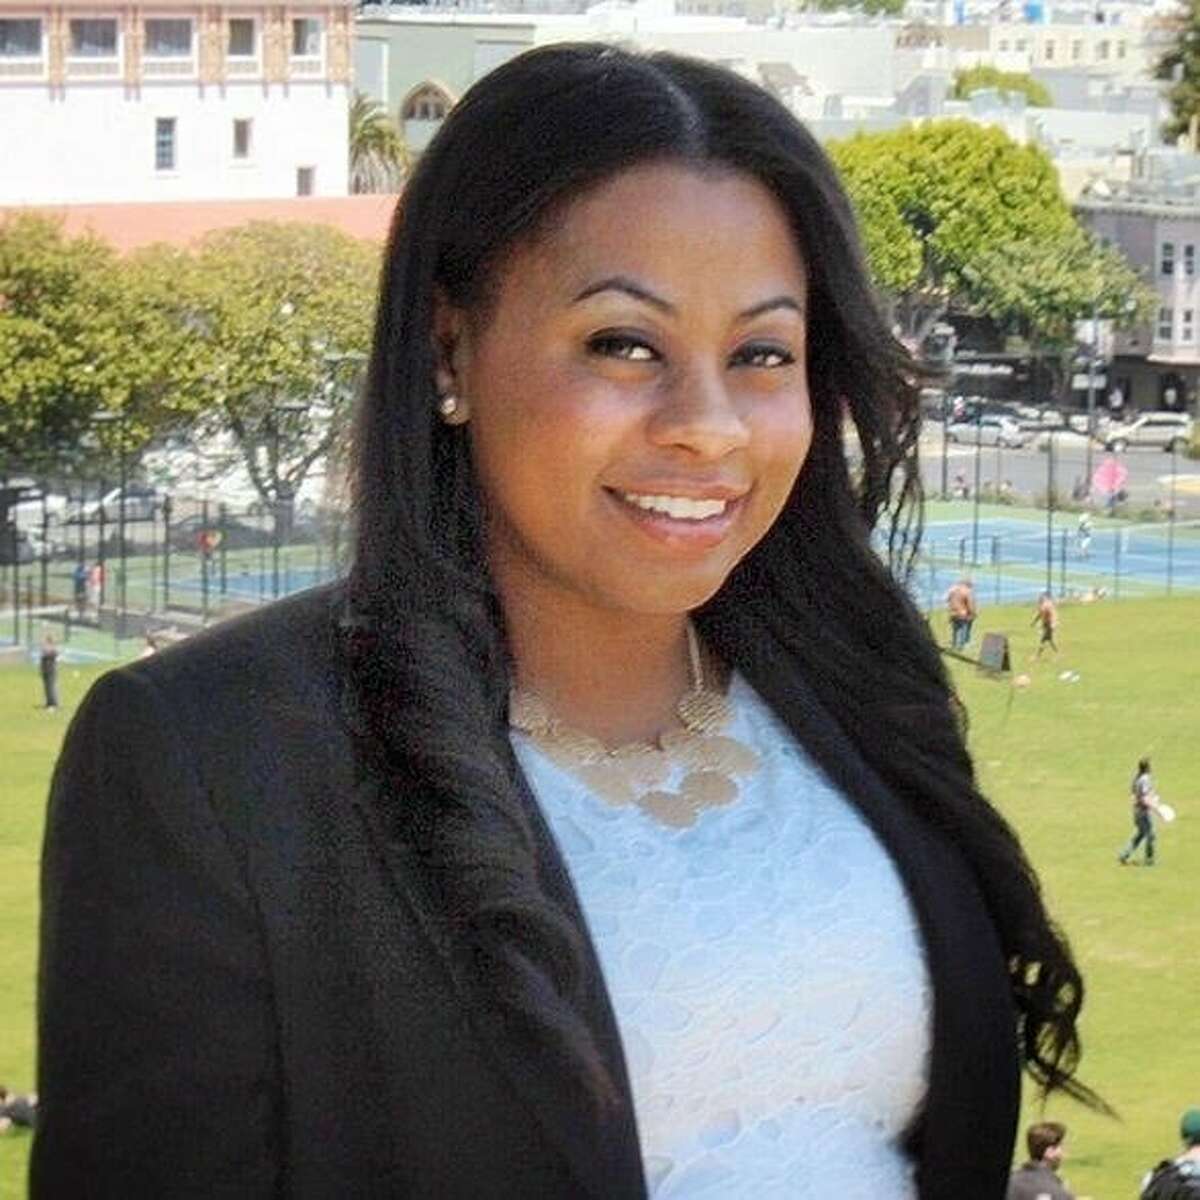 CCSF trustee candidate Shanell Williams